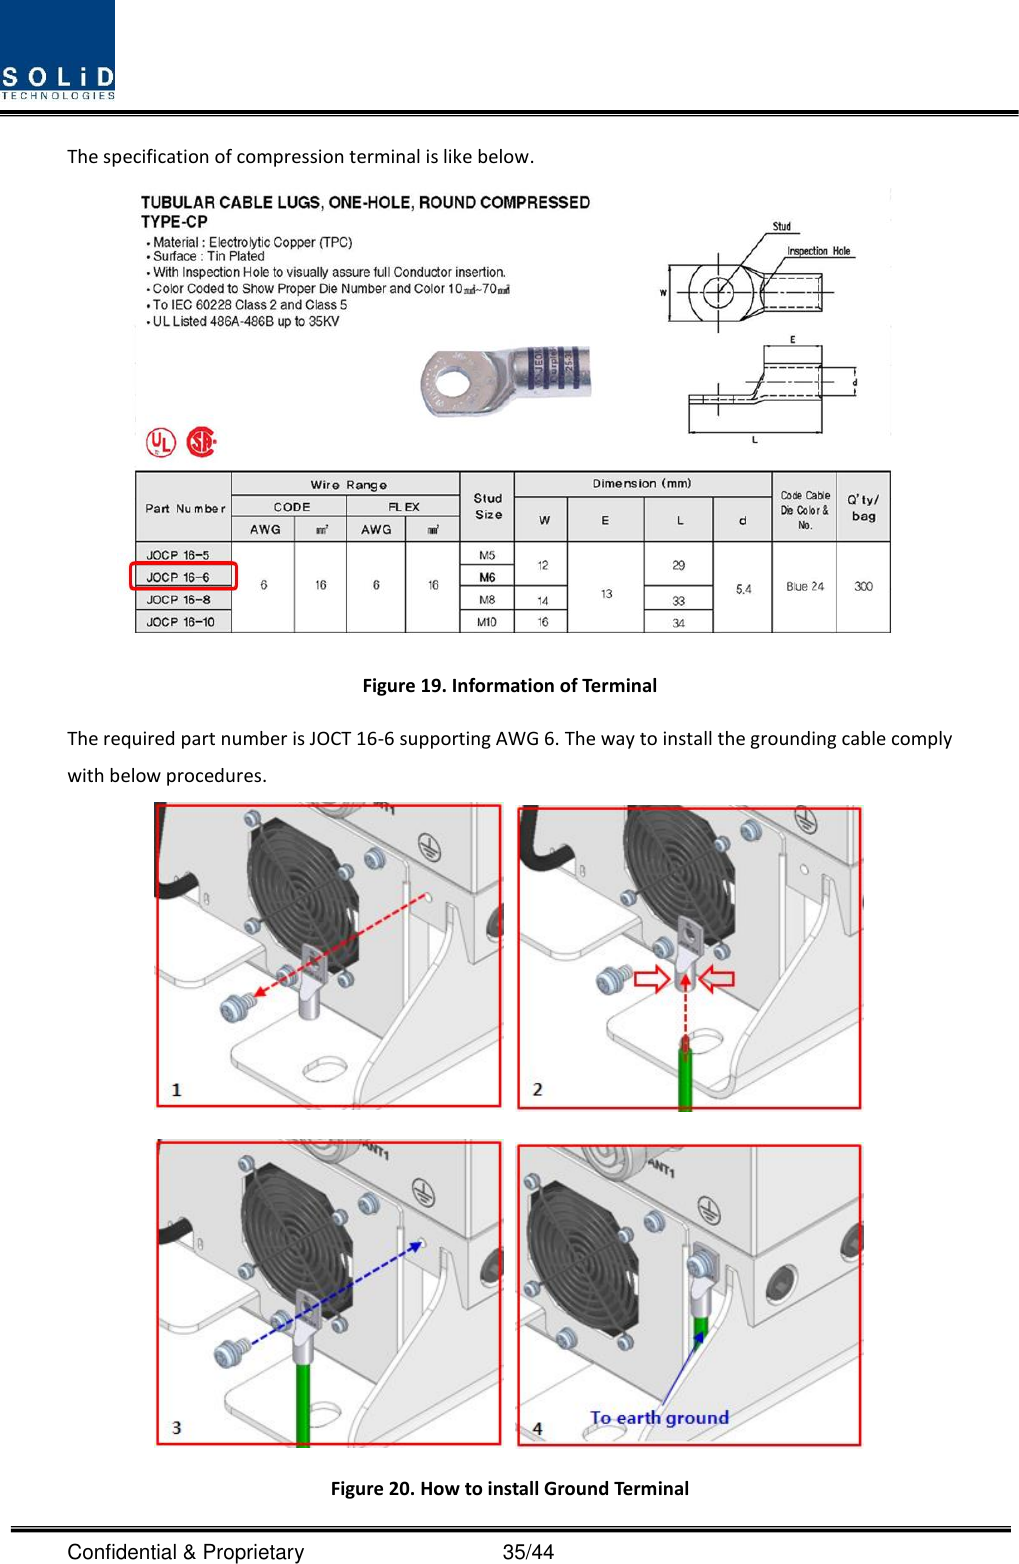  Confidential &amp; Proprietary                                      35/44 The specification of compression terminal is like below.  Figure 19. Information of Terminal The required part number is JOCT 16-6 supporting AWG 6. The way to install the grounding cable comply with below procedures.     Figure 20. How to install Ground Terminal 